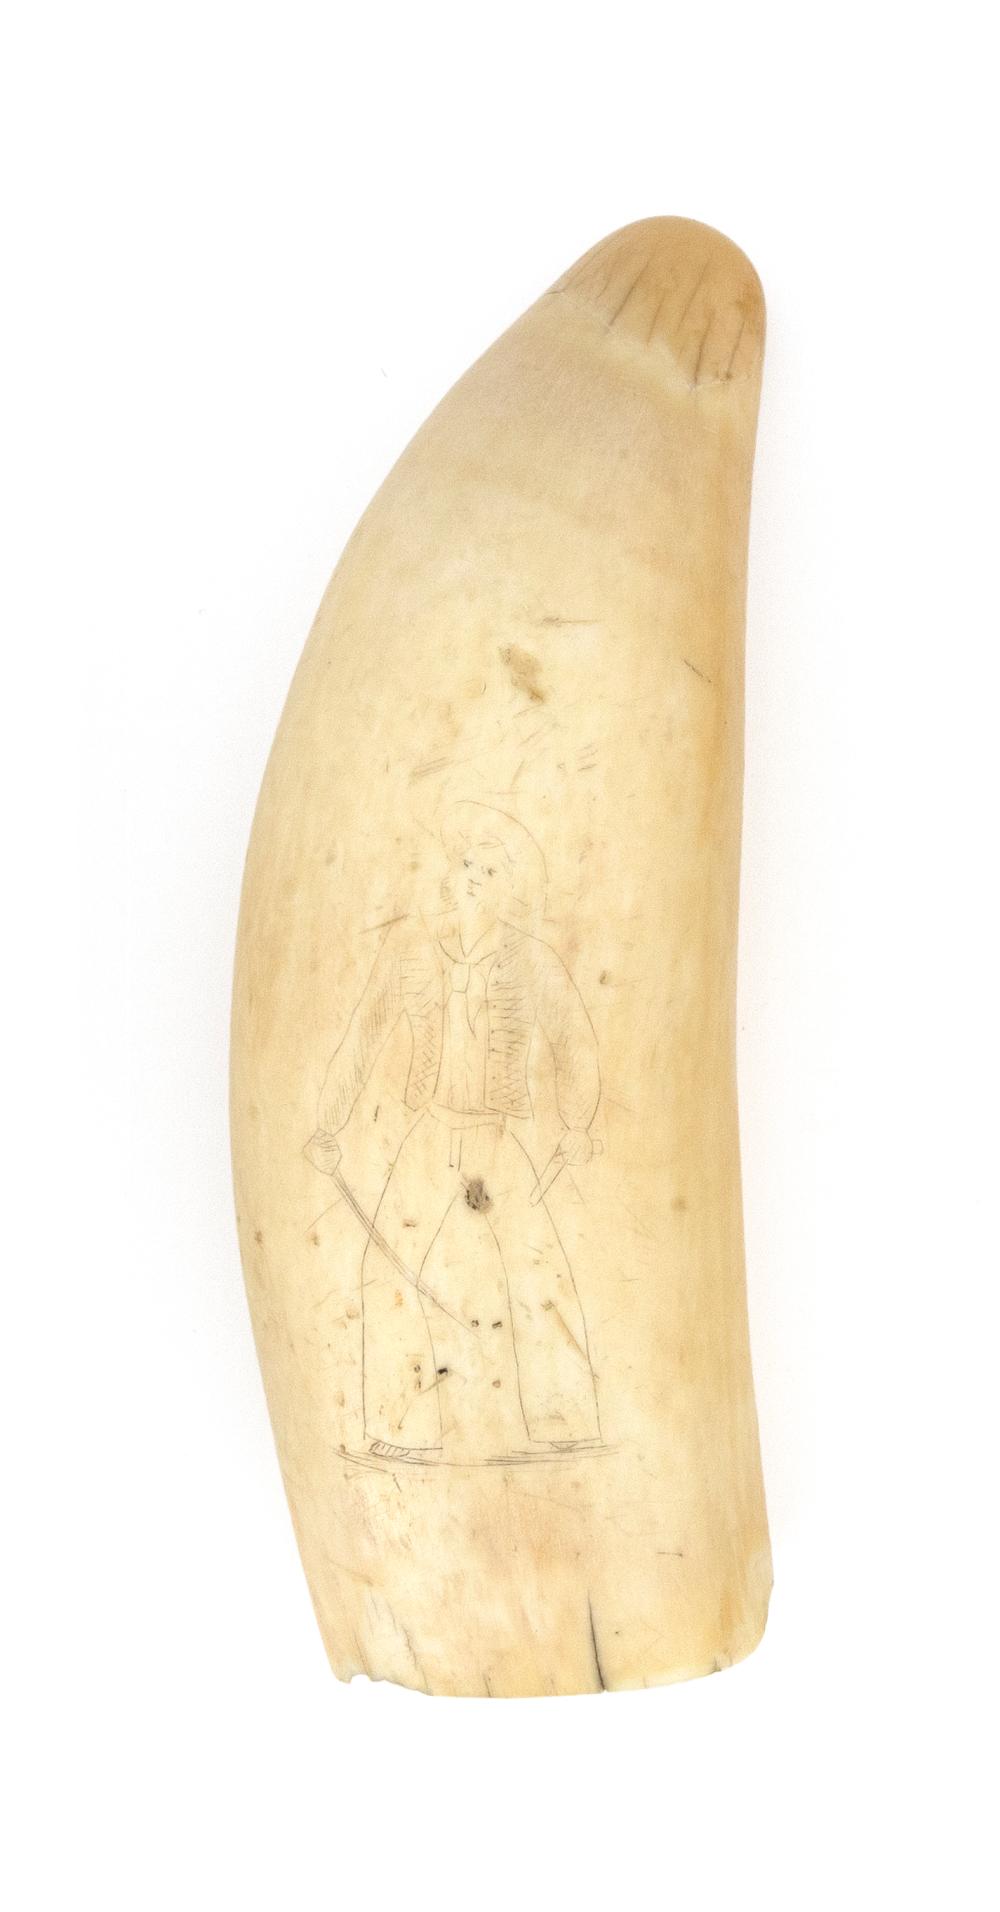 SCRIMSHAW WHALE S TOOTH DEPICTING 34c655